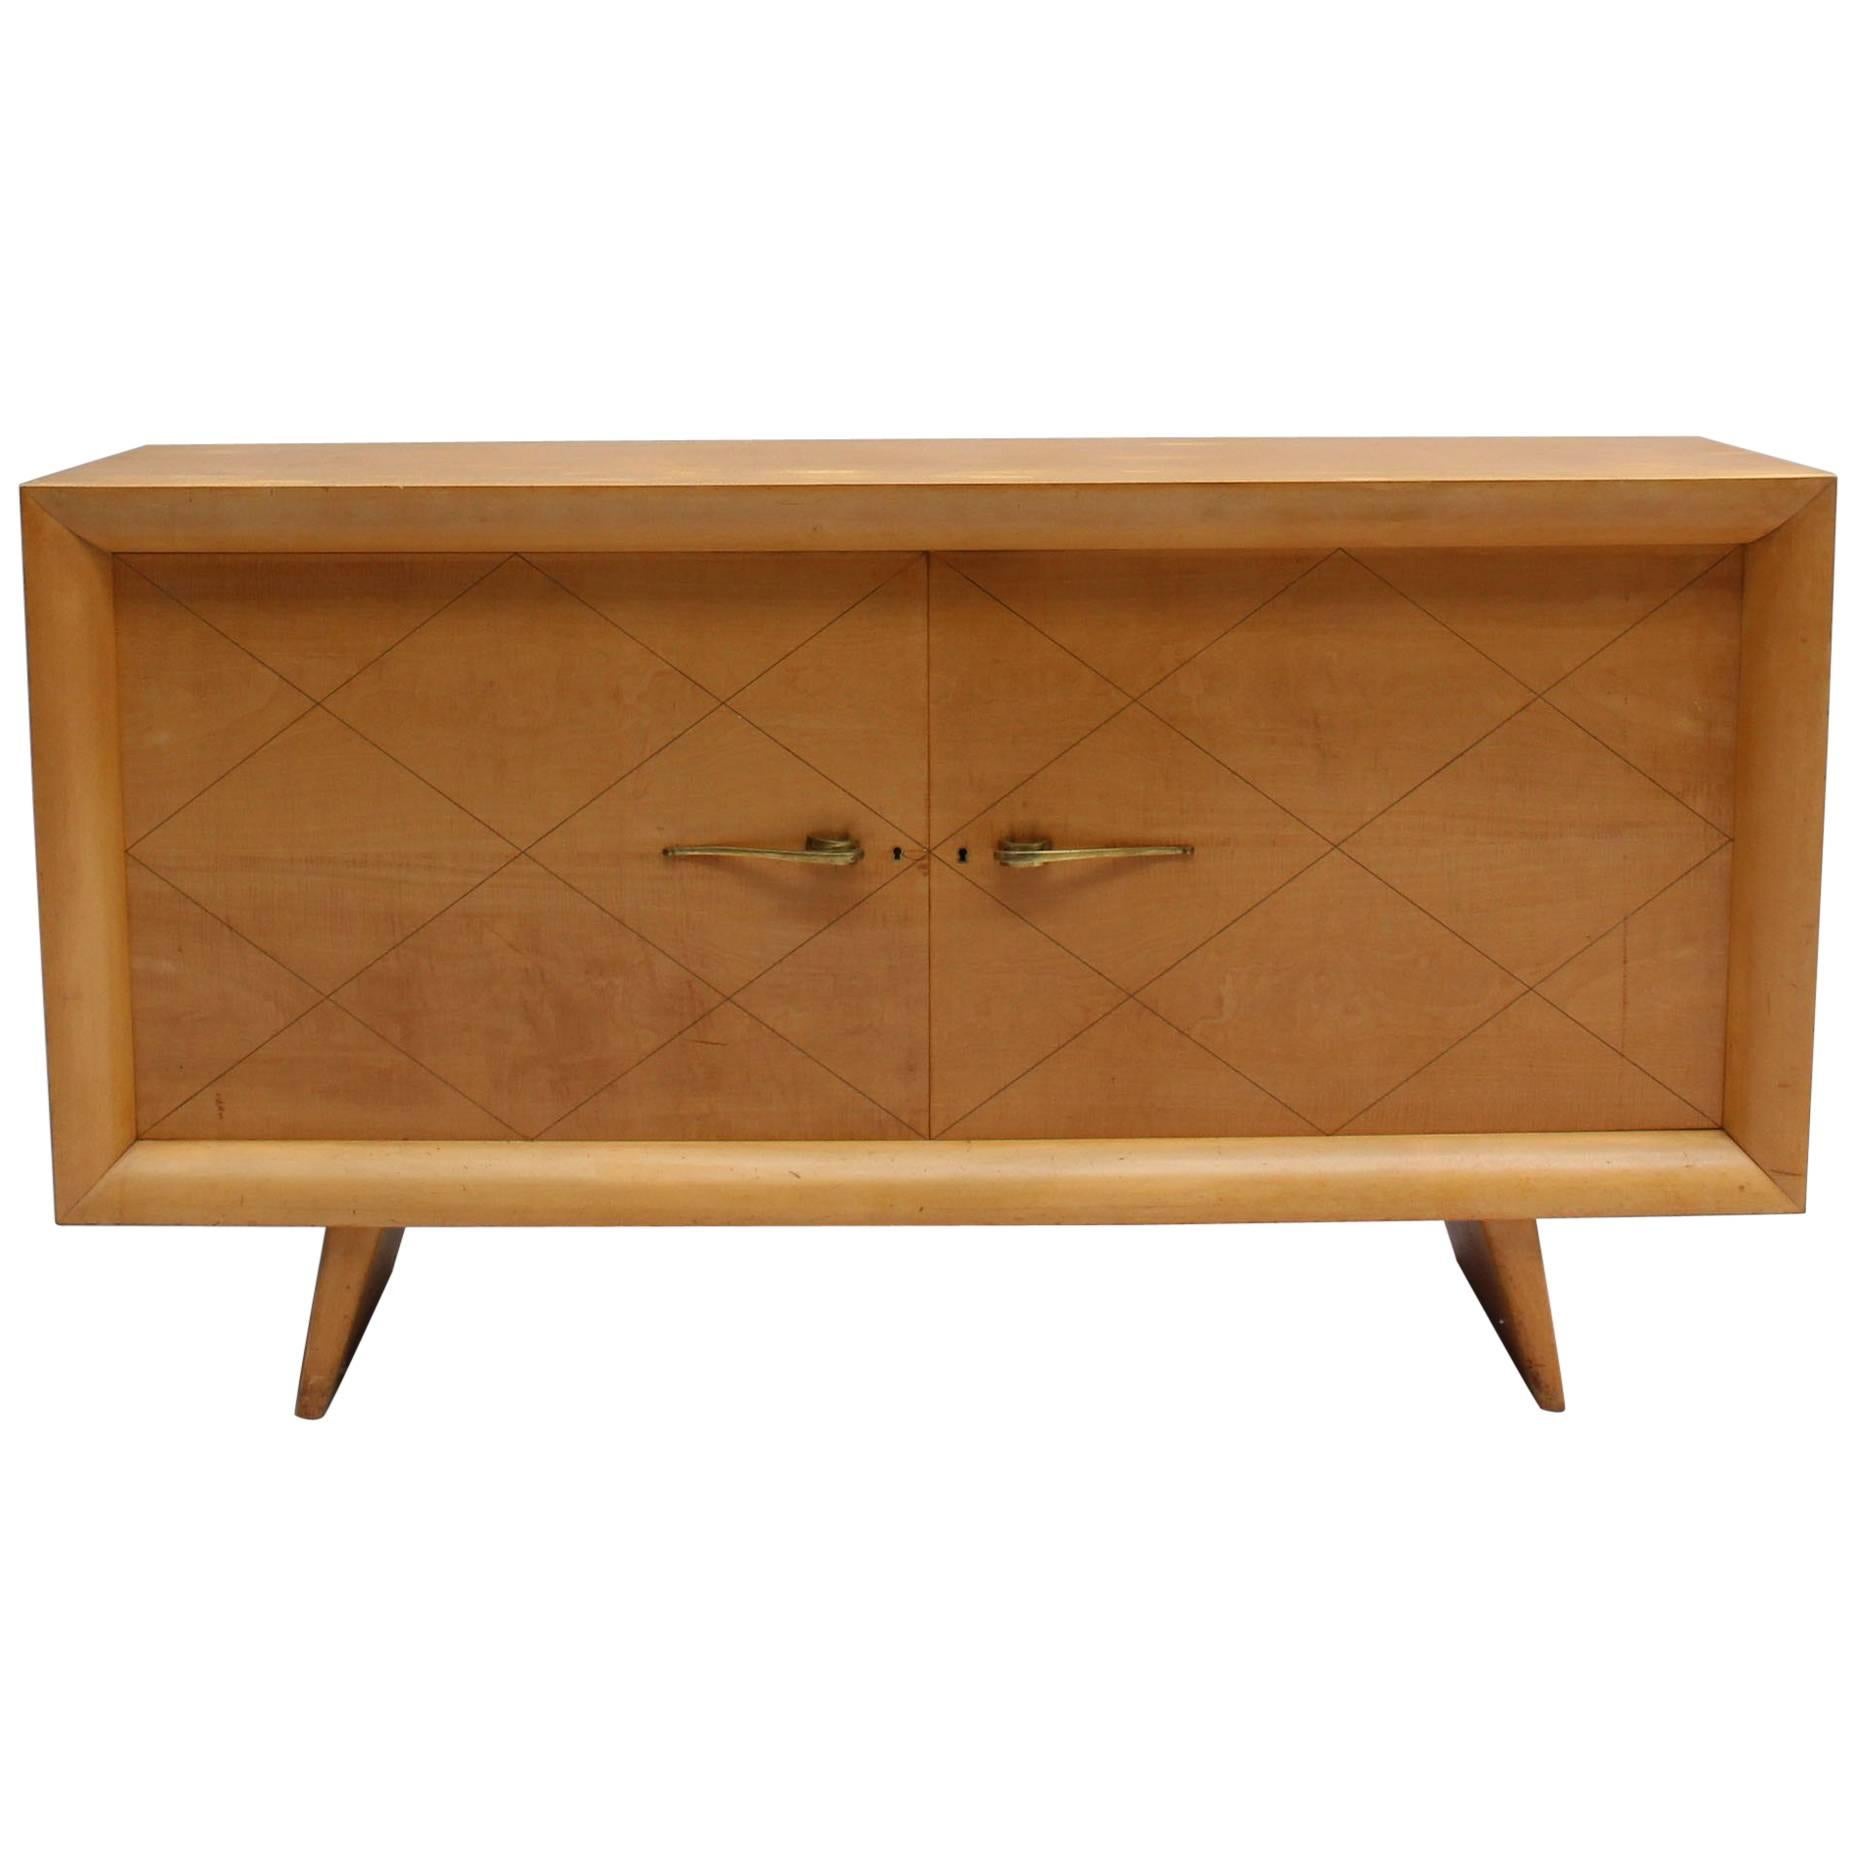 French Art Deco Two-Door Sycamore Buffet by Suzanne Guiguichon